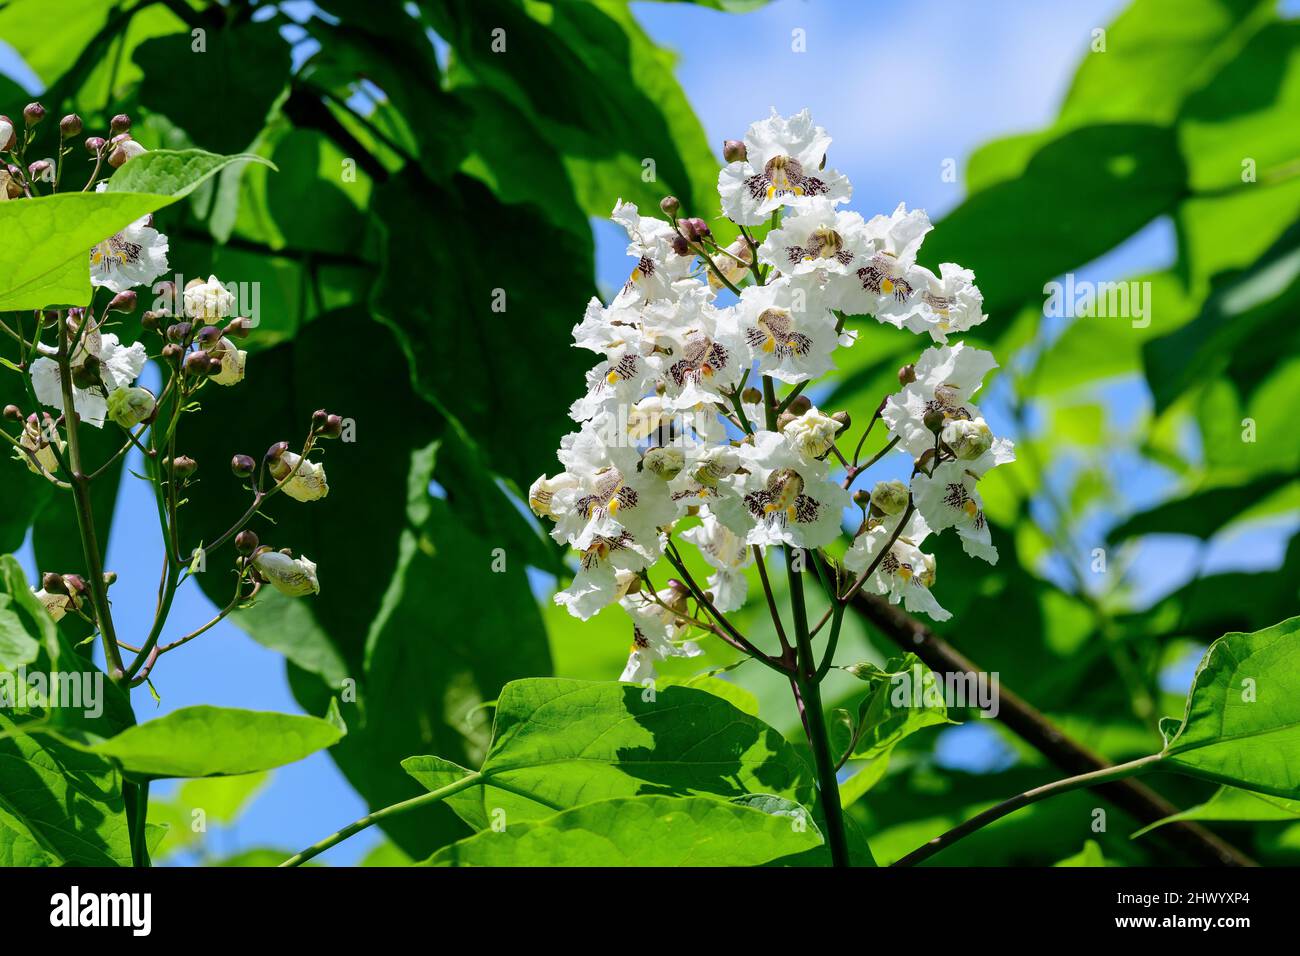 Large branches with decorative white flowers and green leaves of Catalpa bignonioides plant commonly known as southern catalpa, cigartree or Indian be Stock Photo